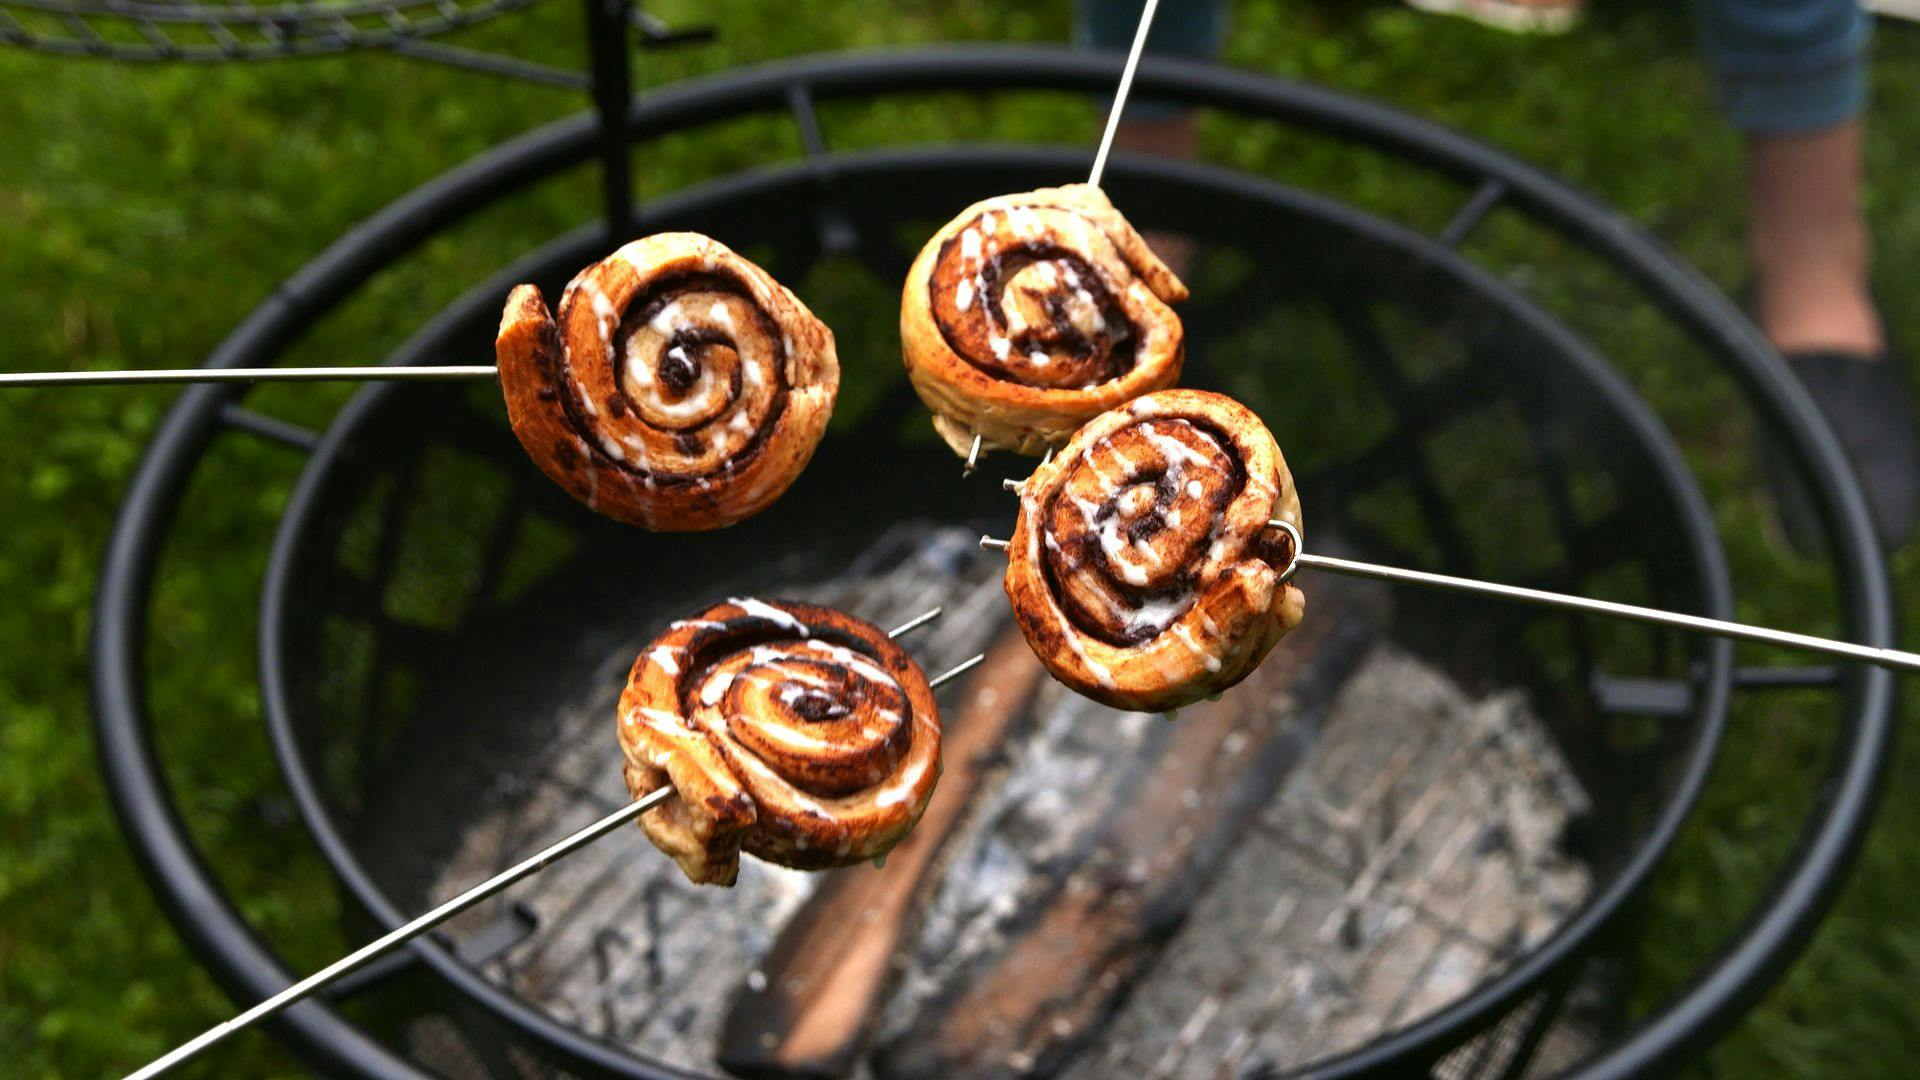 Cinnamon rolls on sticks being cooked over a grill